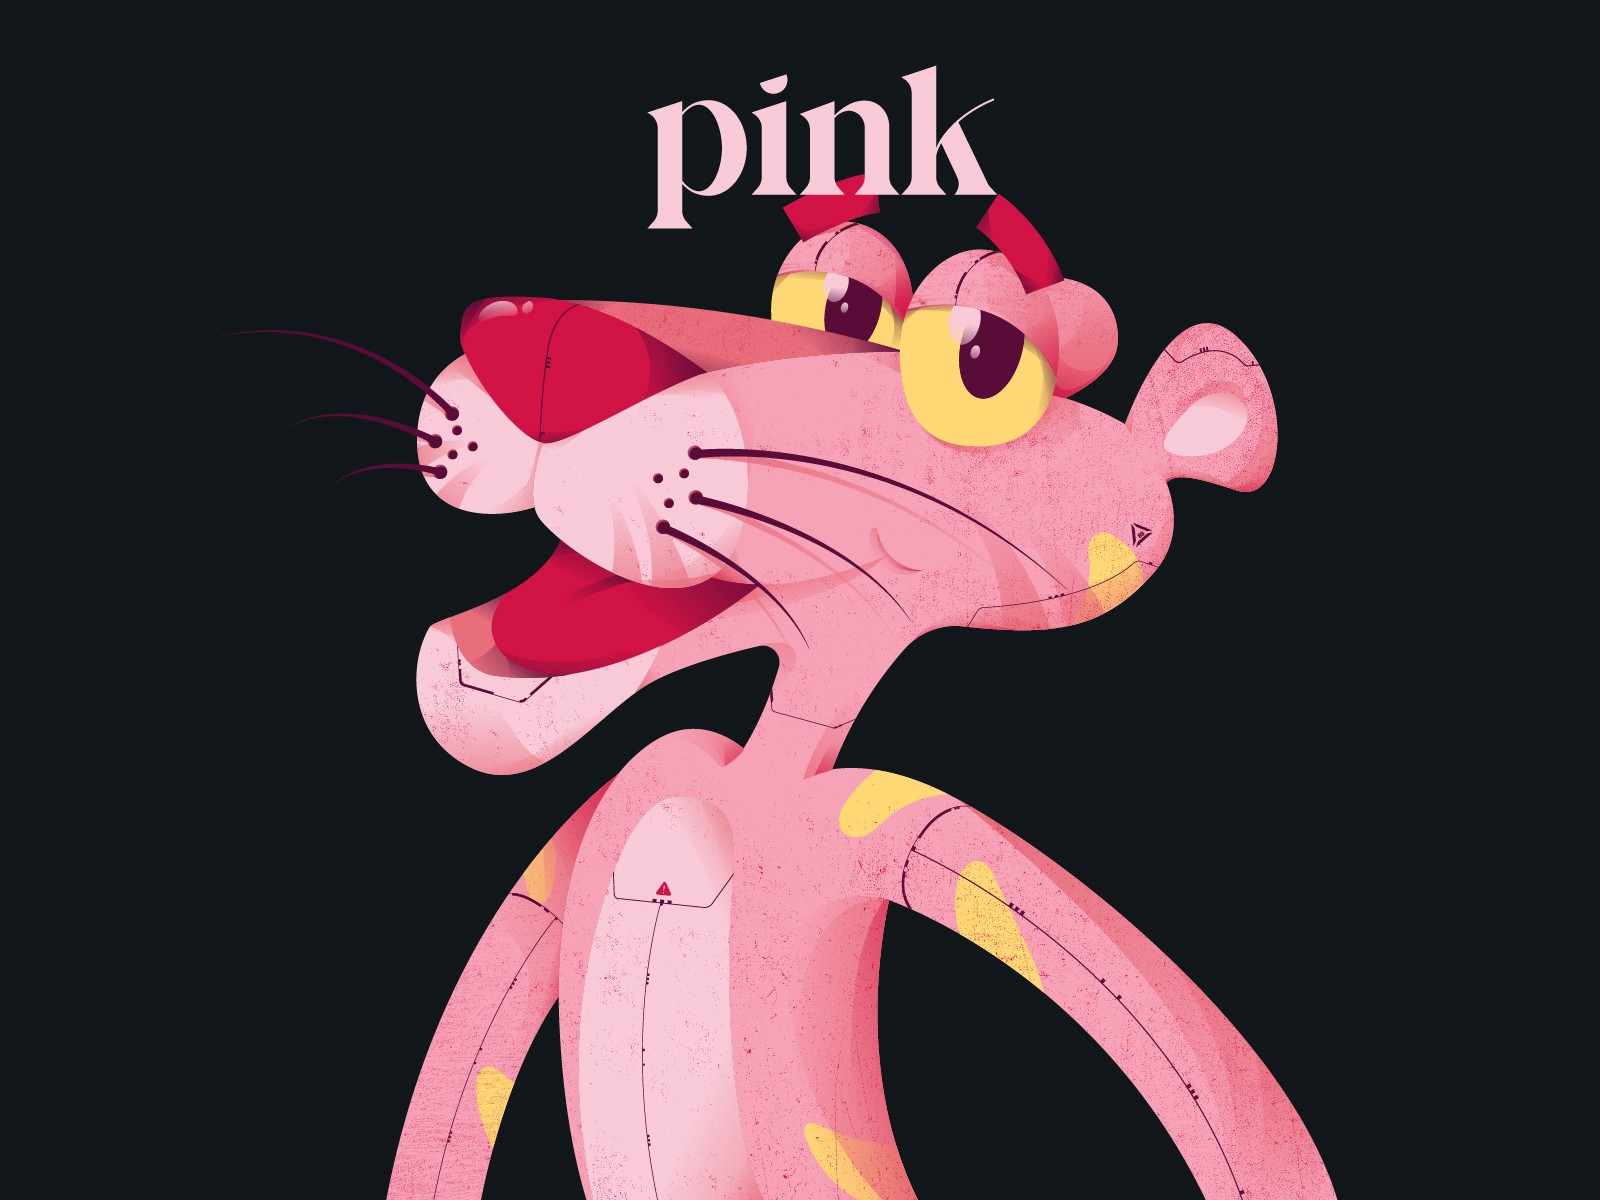 pink panther fanart by Tsukihime on Dribbble